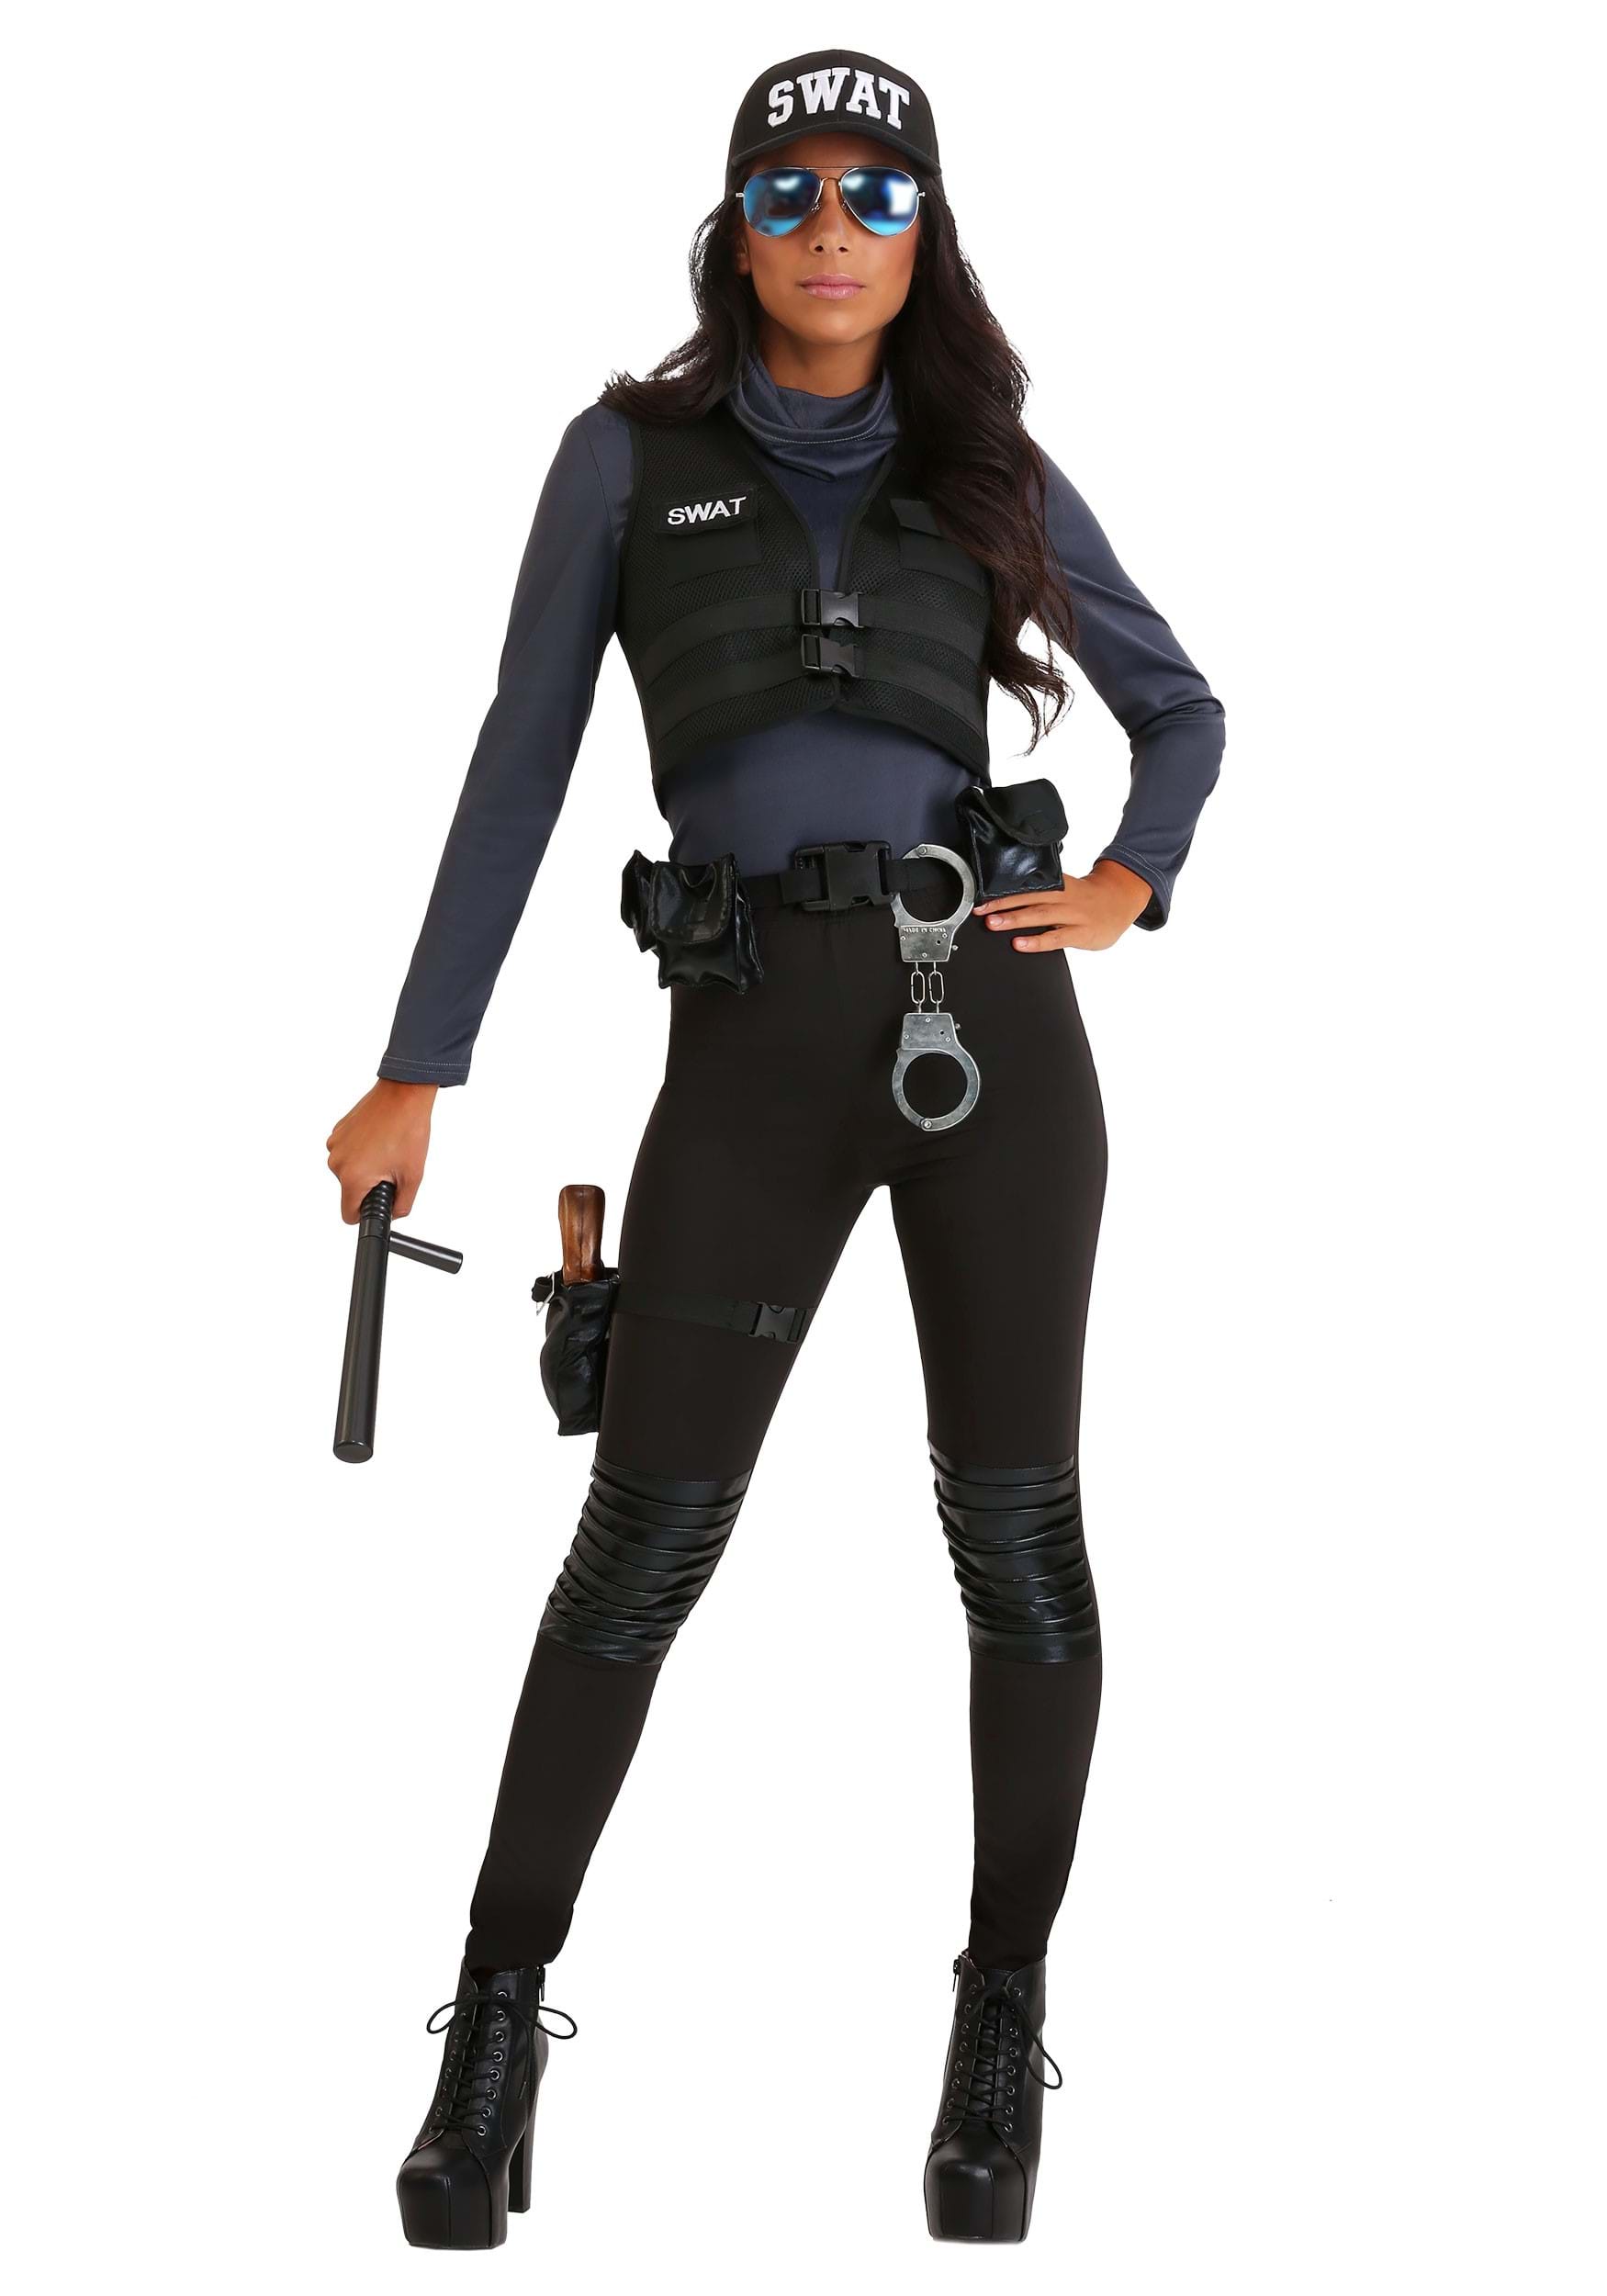 Elf Police Uniform With Holster, Belt and Gun Set, for Elf Dolls, Doll  Clothing, Accessories, Outfit, Costume 